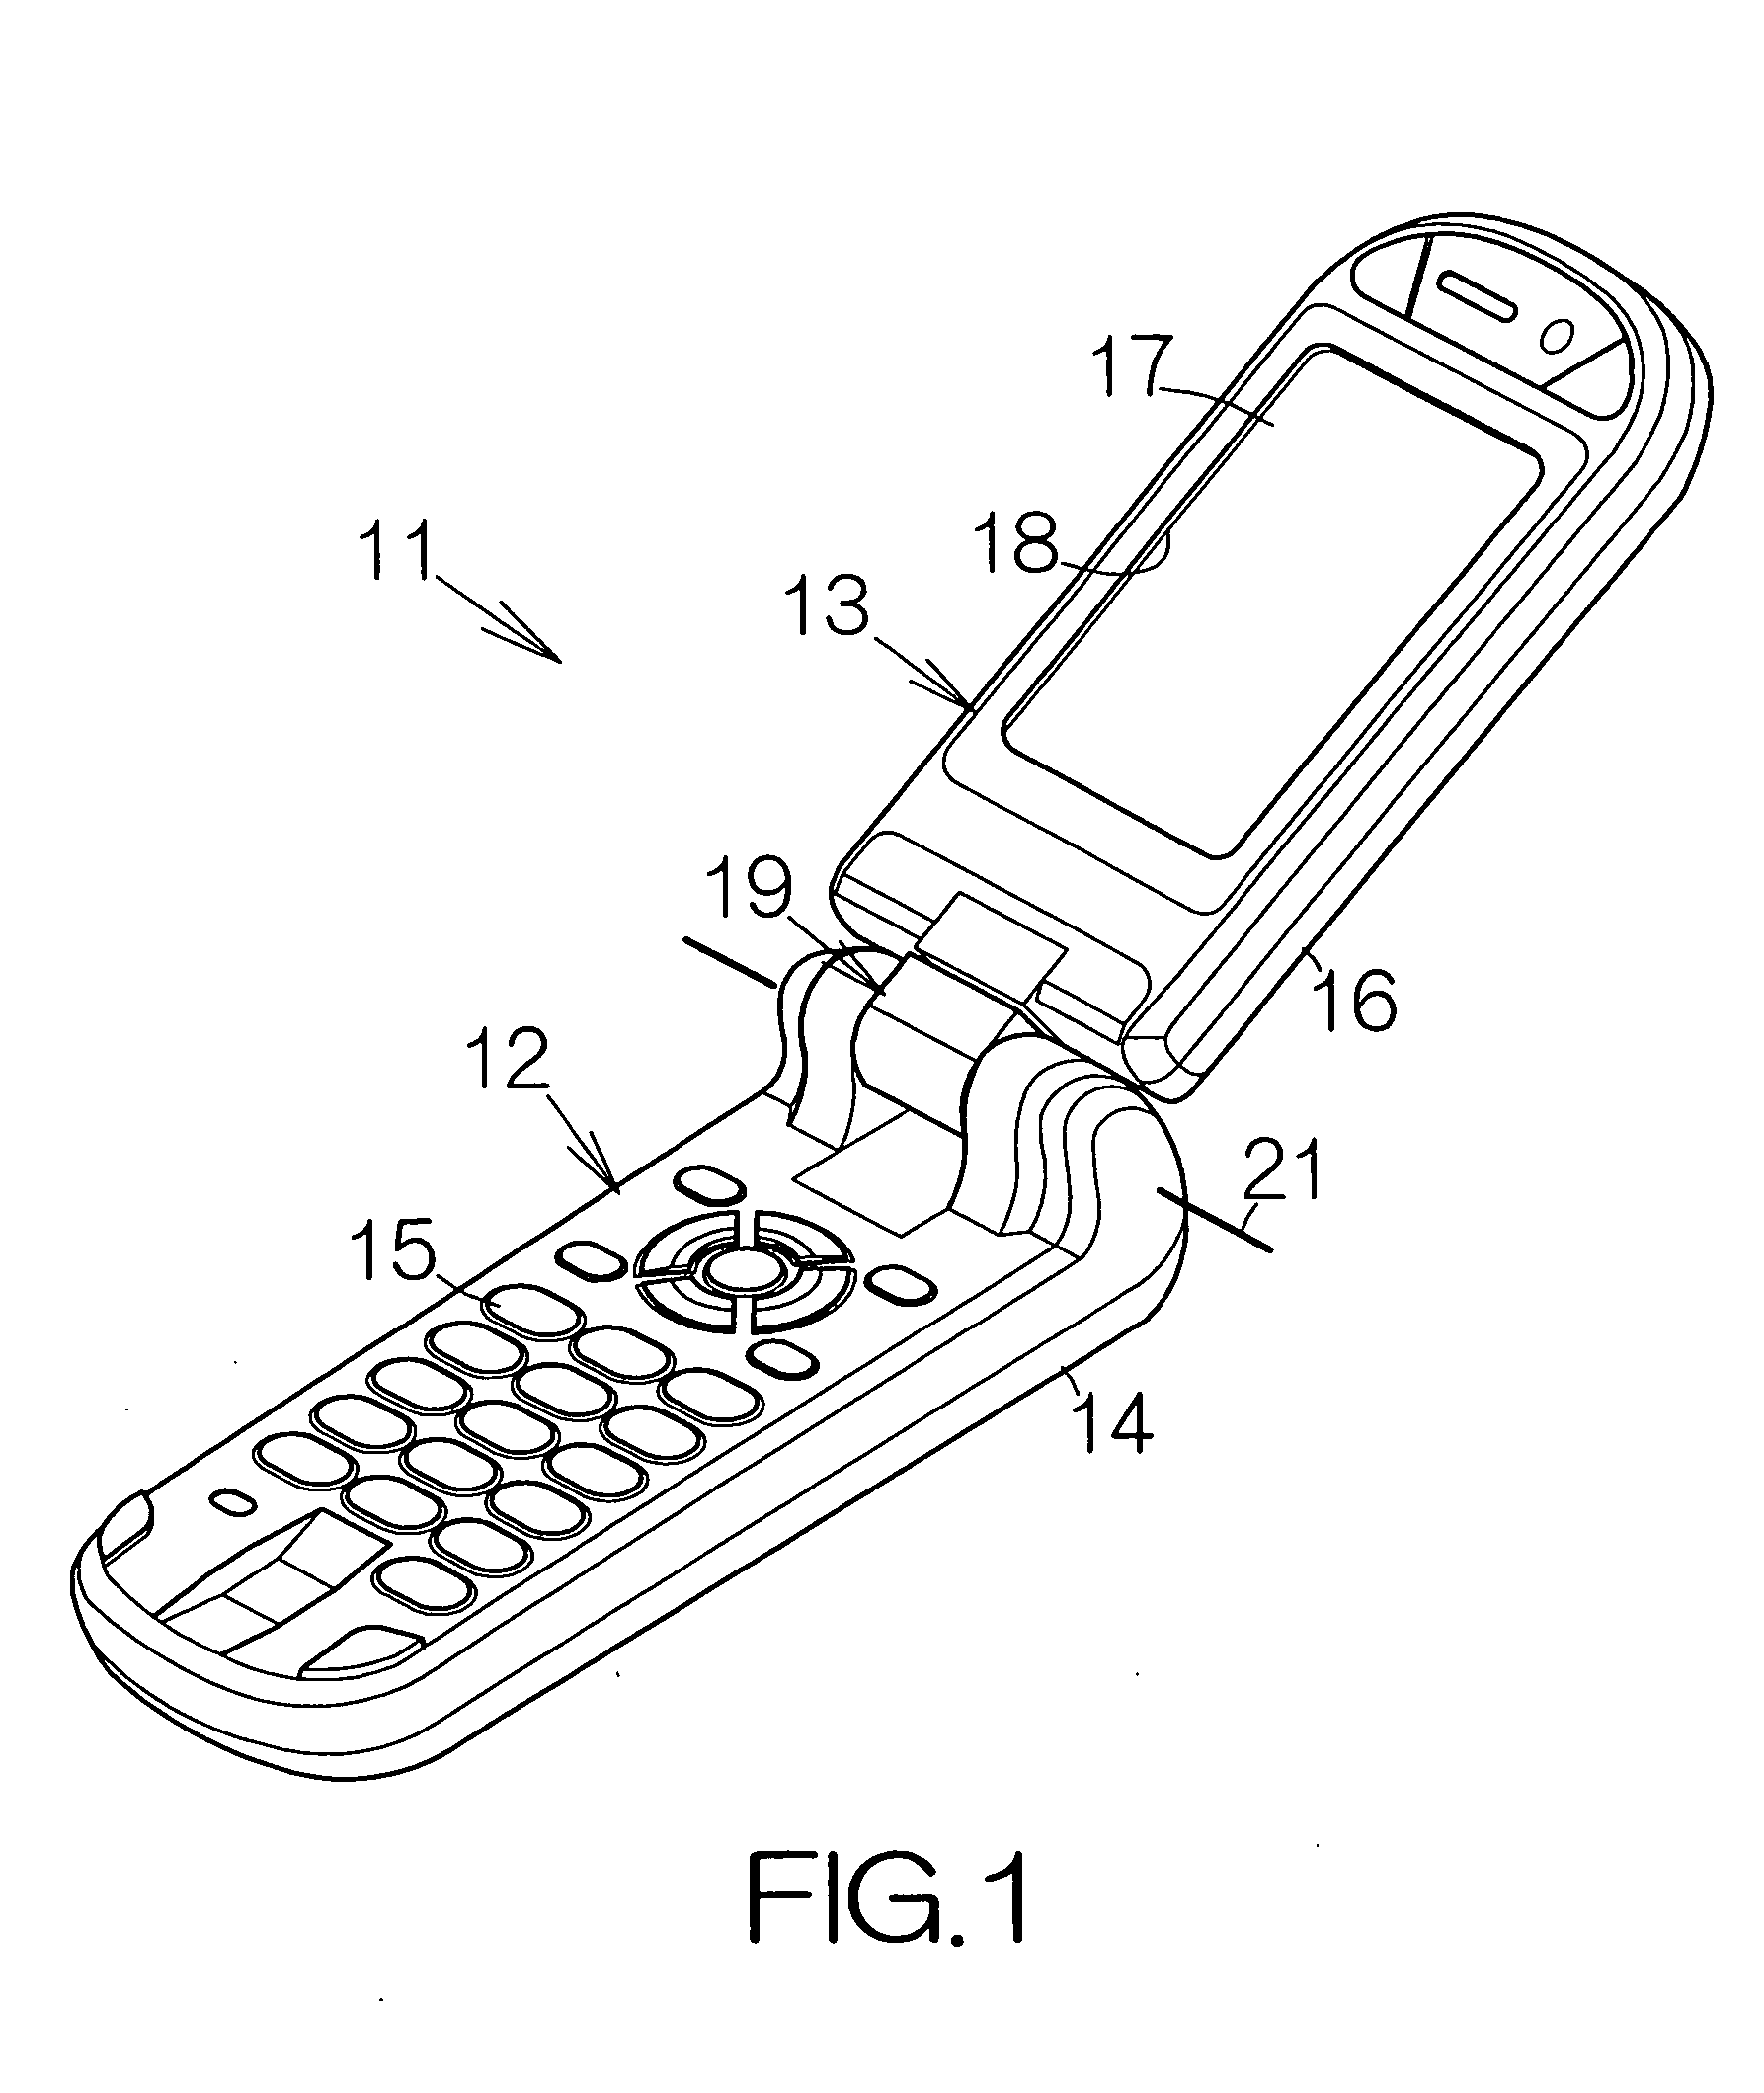 Article made of biodegradable resin and method of making the same